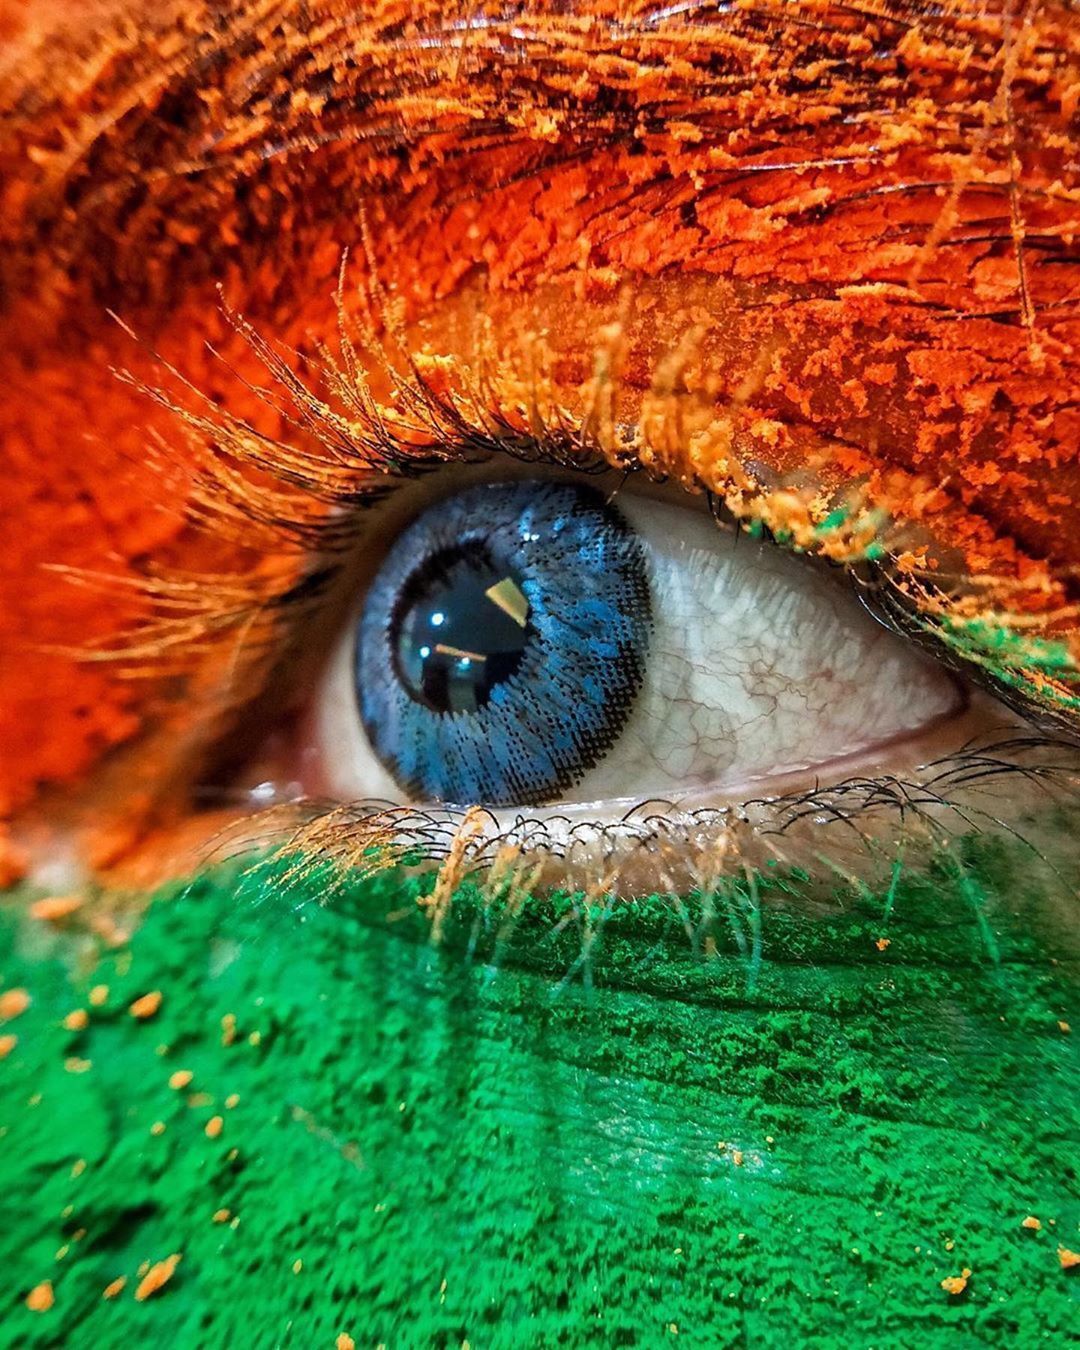 Indian flag of india Images and Stock Photos. 10,025 Indian flag of india  photography and royalty free pictures available to download from thousands  of stock photo providers.